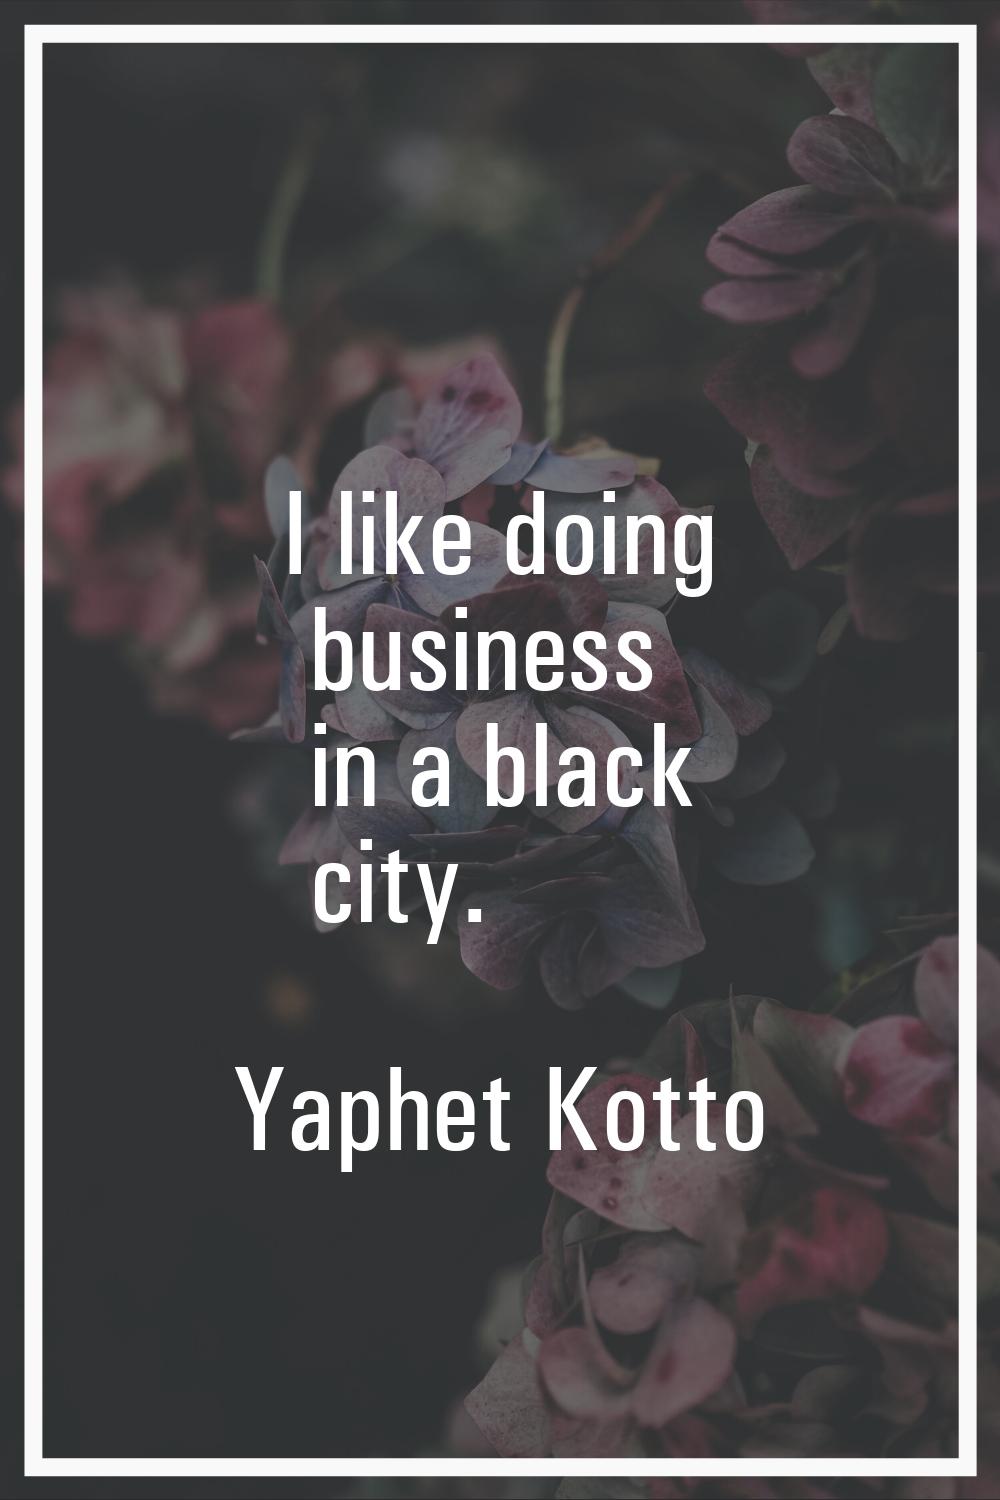 I like doing business in a black city.